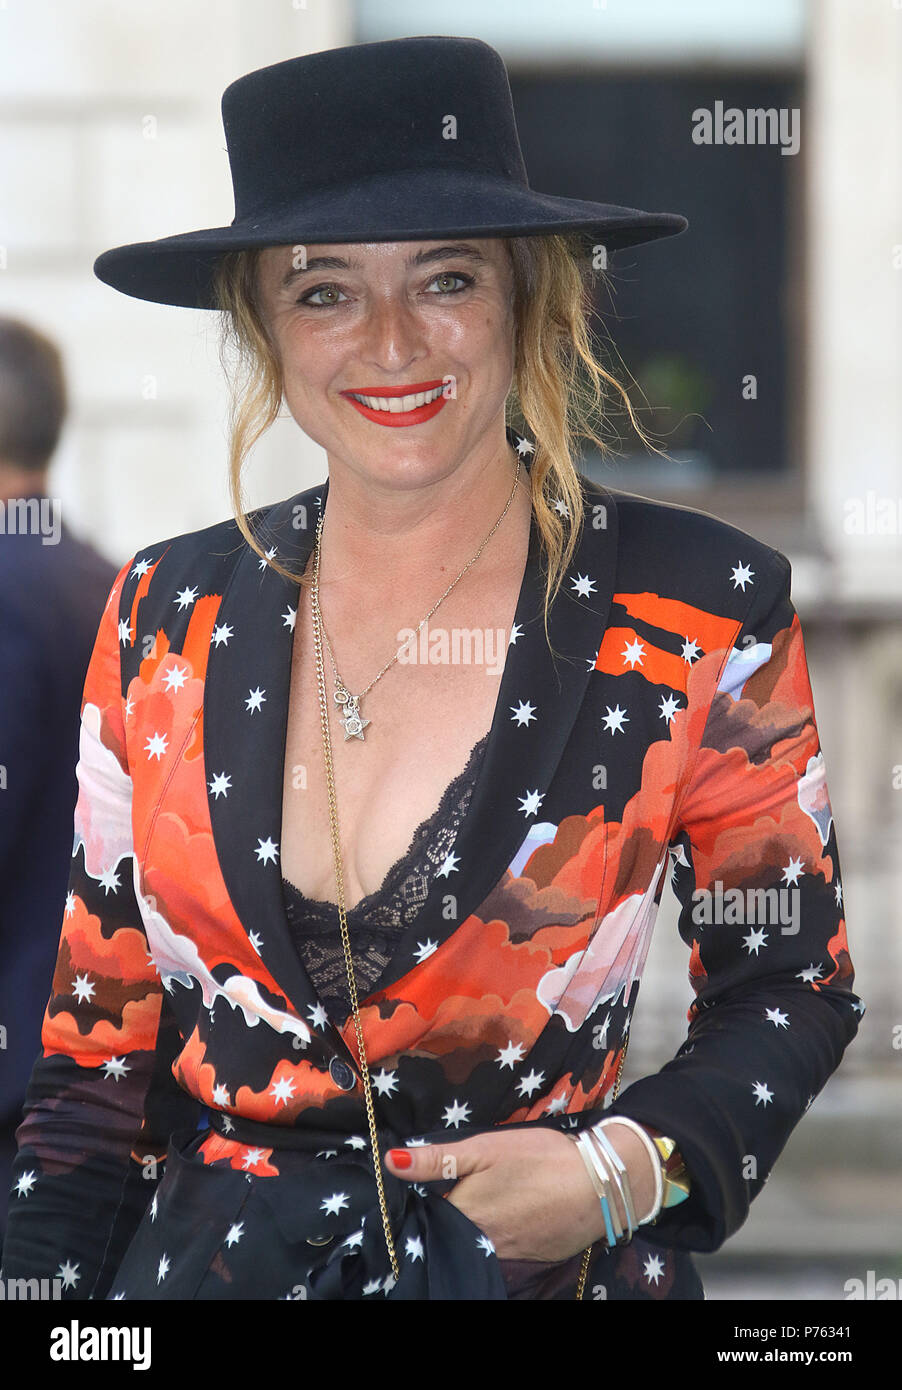 Jun 06, 2018 - Alice Temperley attending Royal Academy Of Arts 250th Summer Exhibition Preview Party at Burlington House in London, England, UK Stock Photo